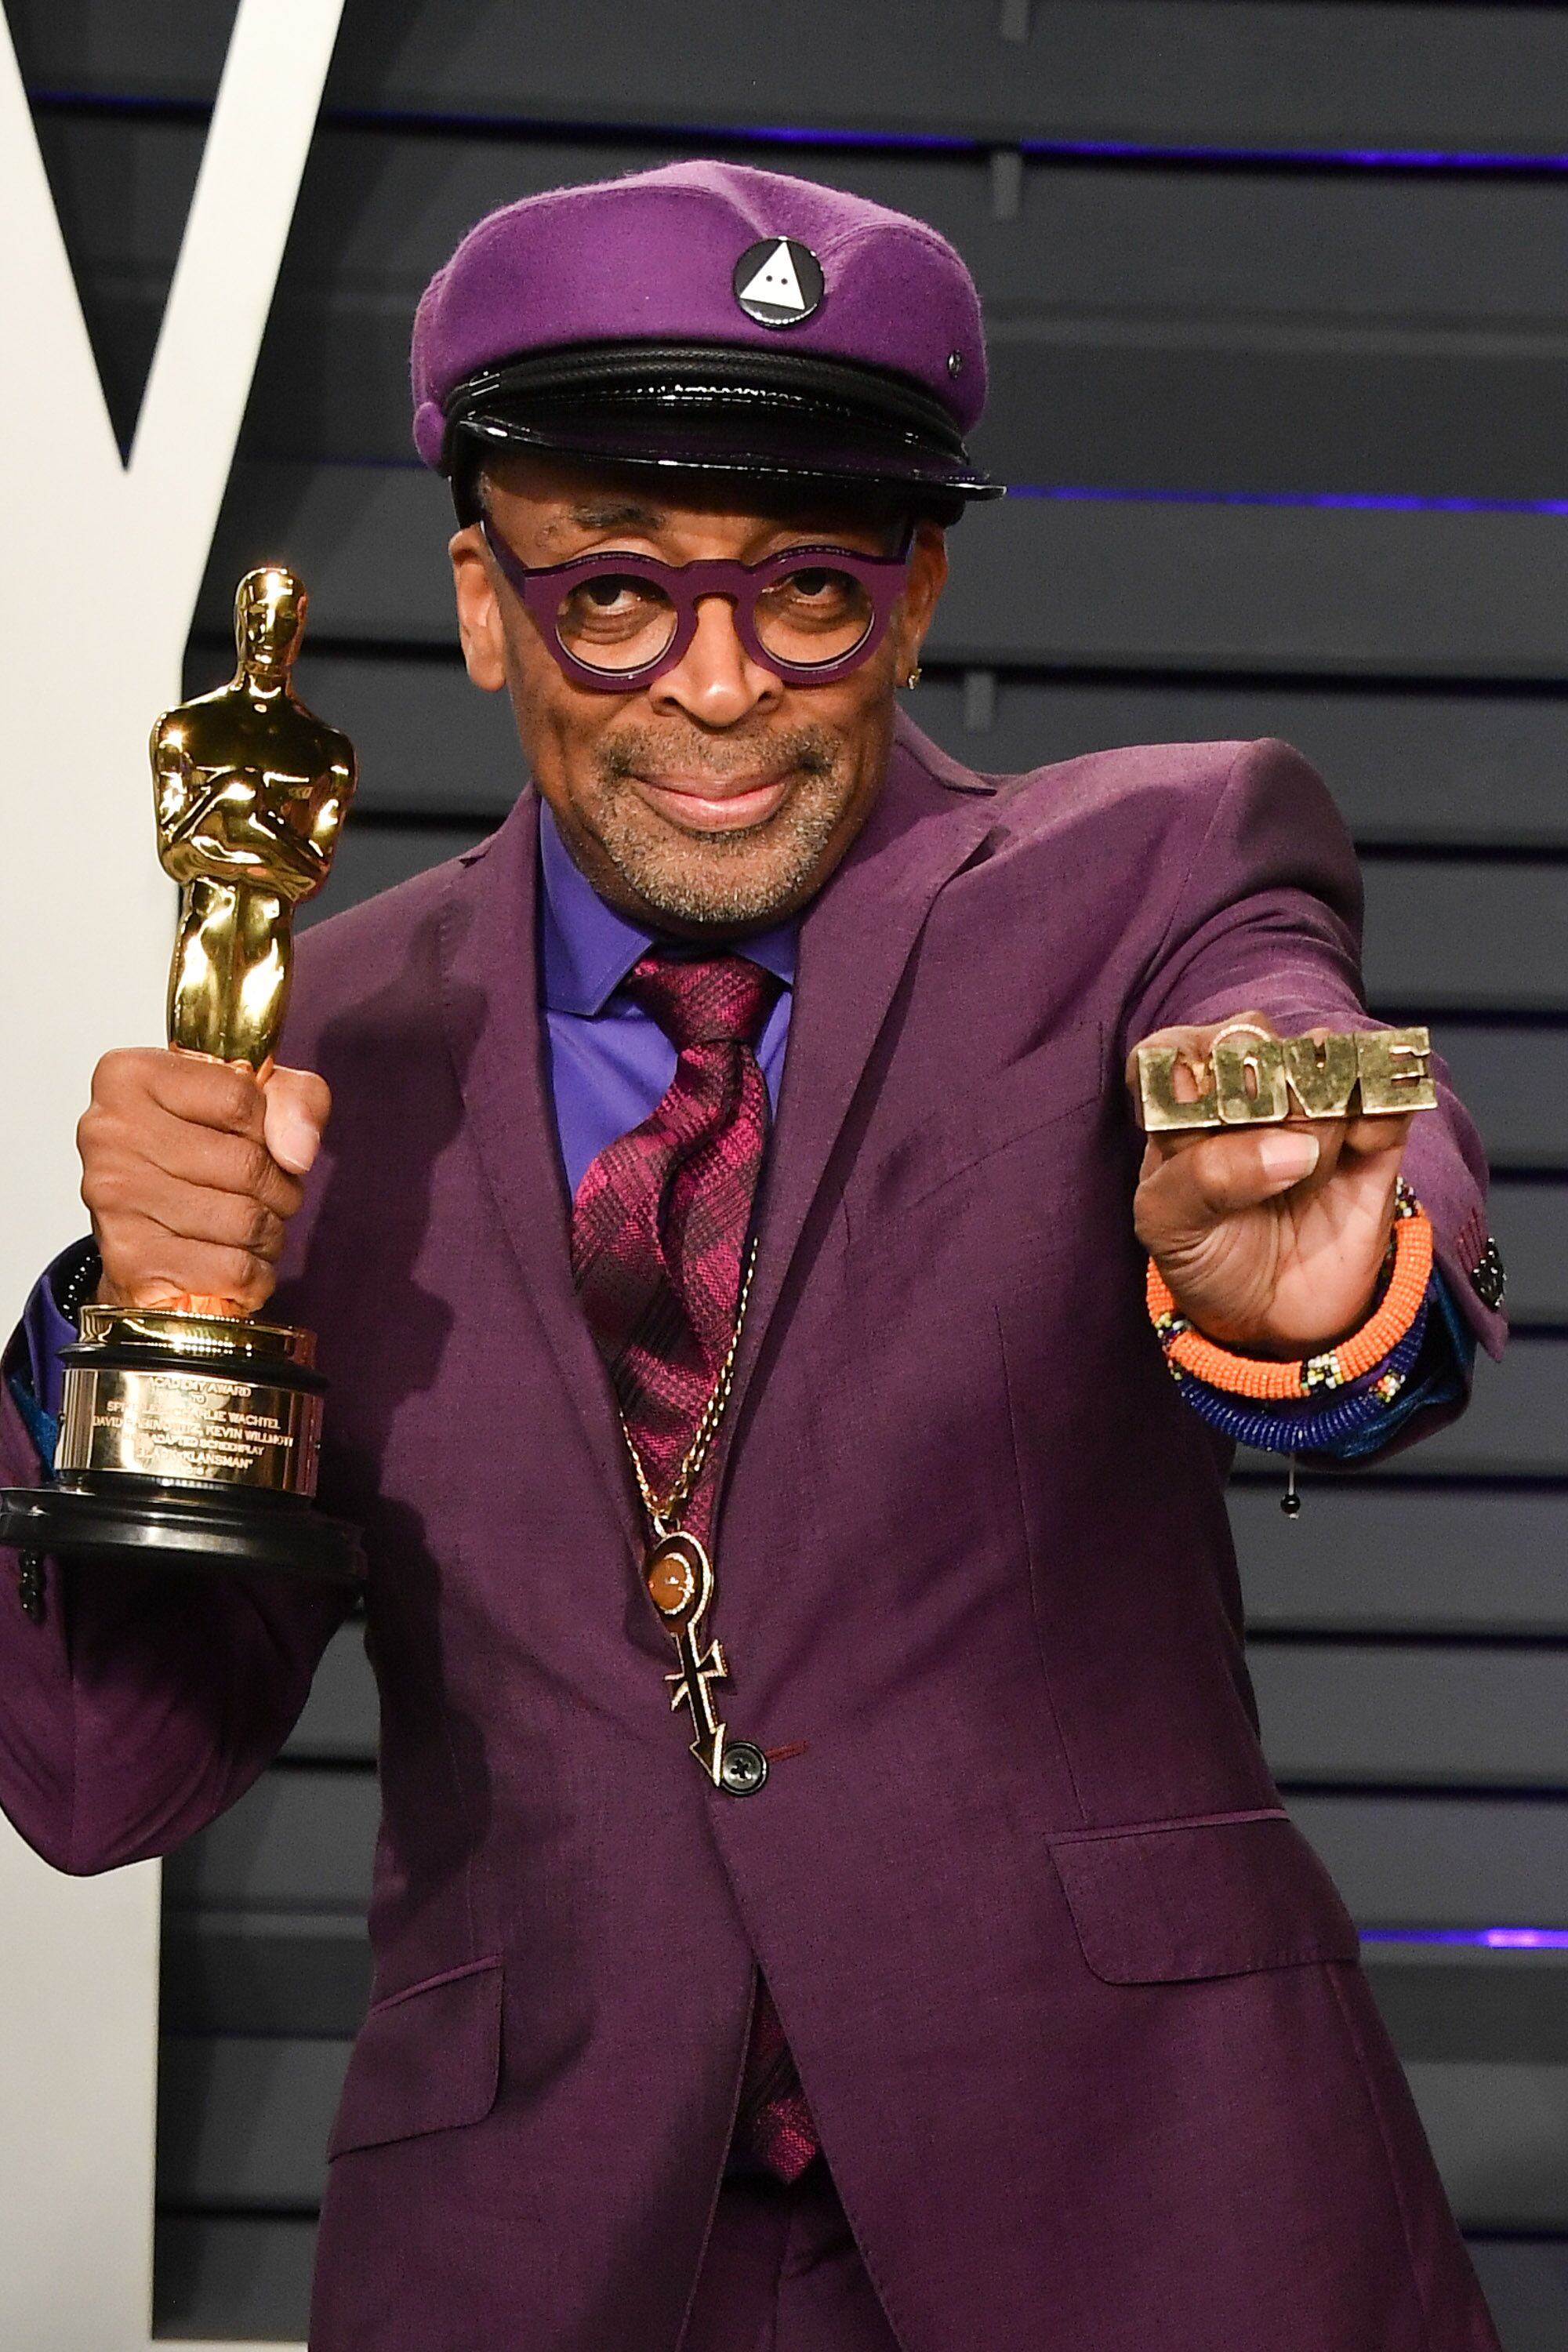 Spike Lee promotes love at the British Academy of Film and Television Awards | Source: Getty Images/GlobalImagesUkraine